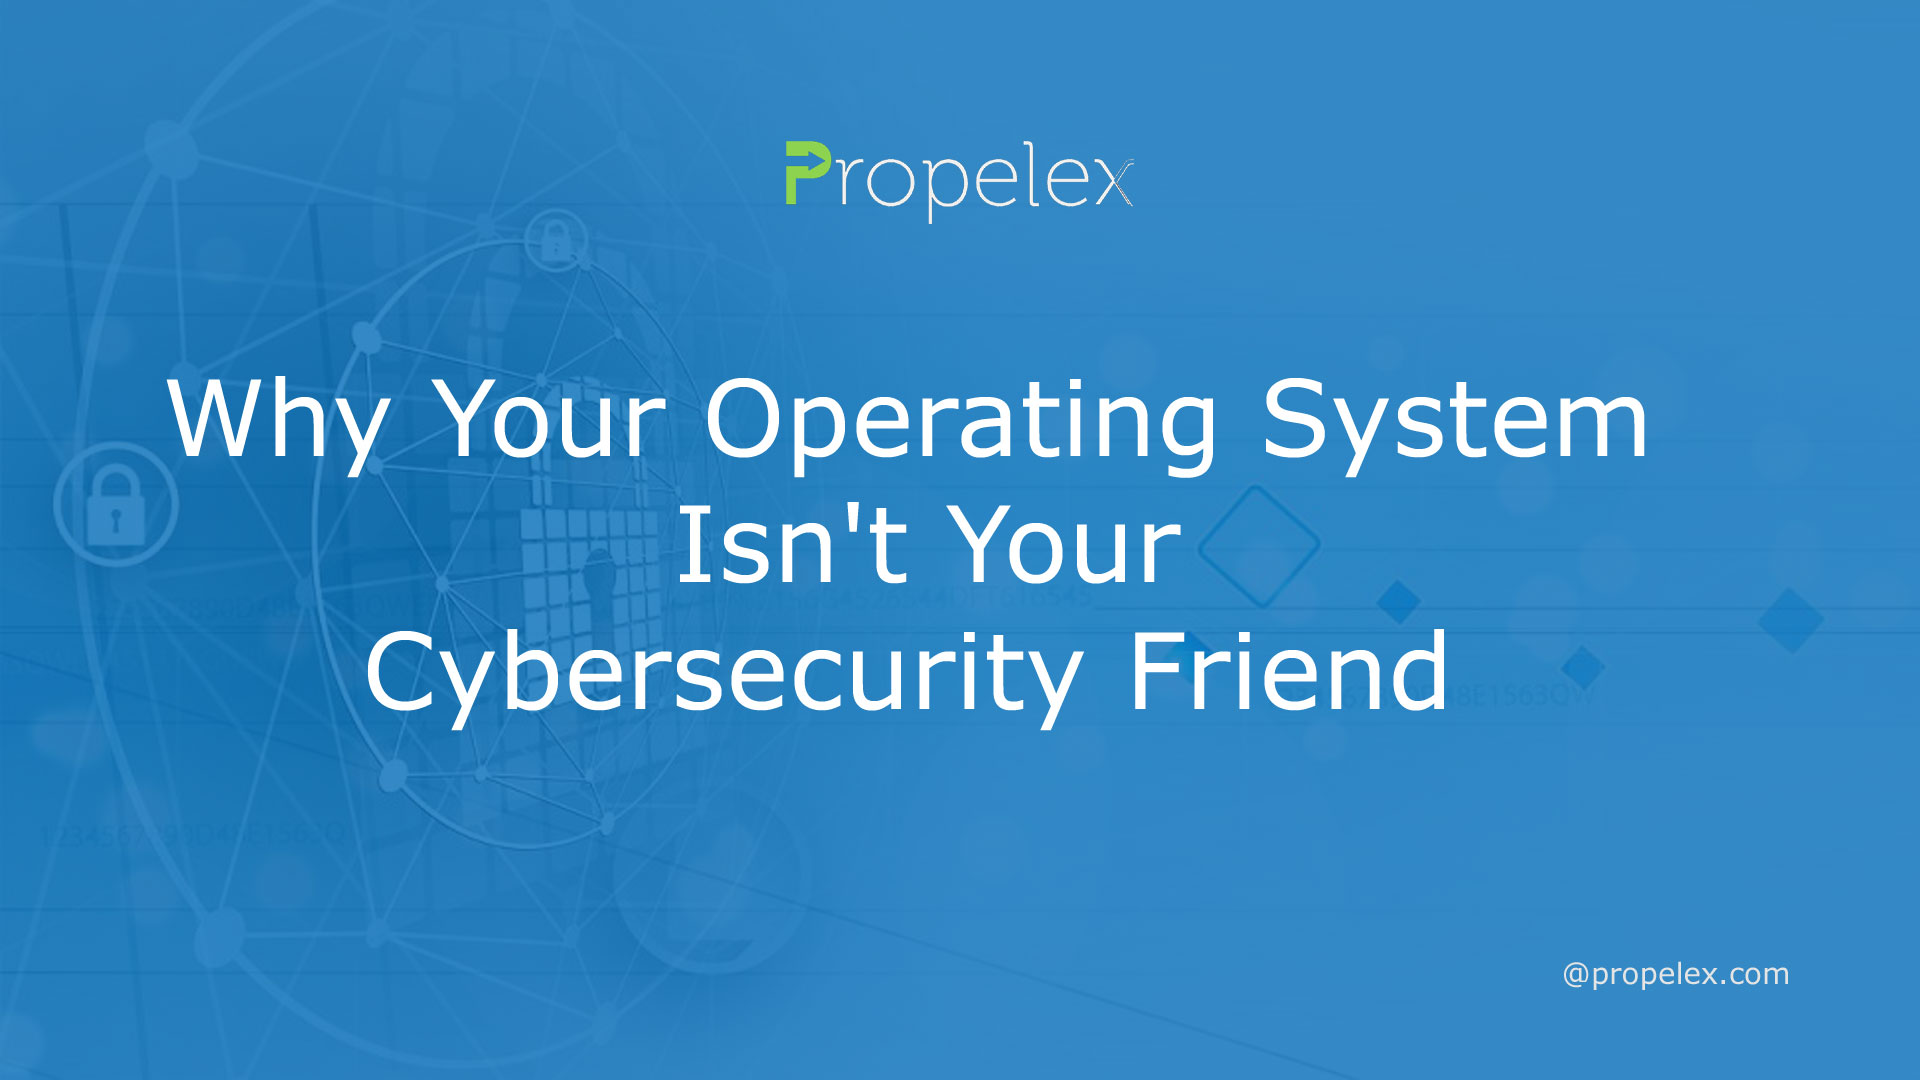 Why Your Operating System Isn't Your Cybersecurity Friend